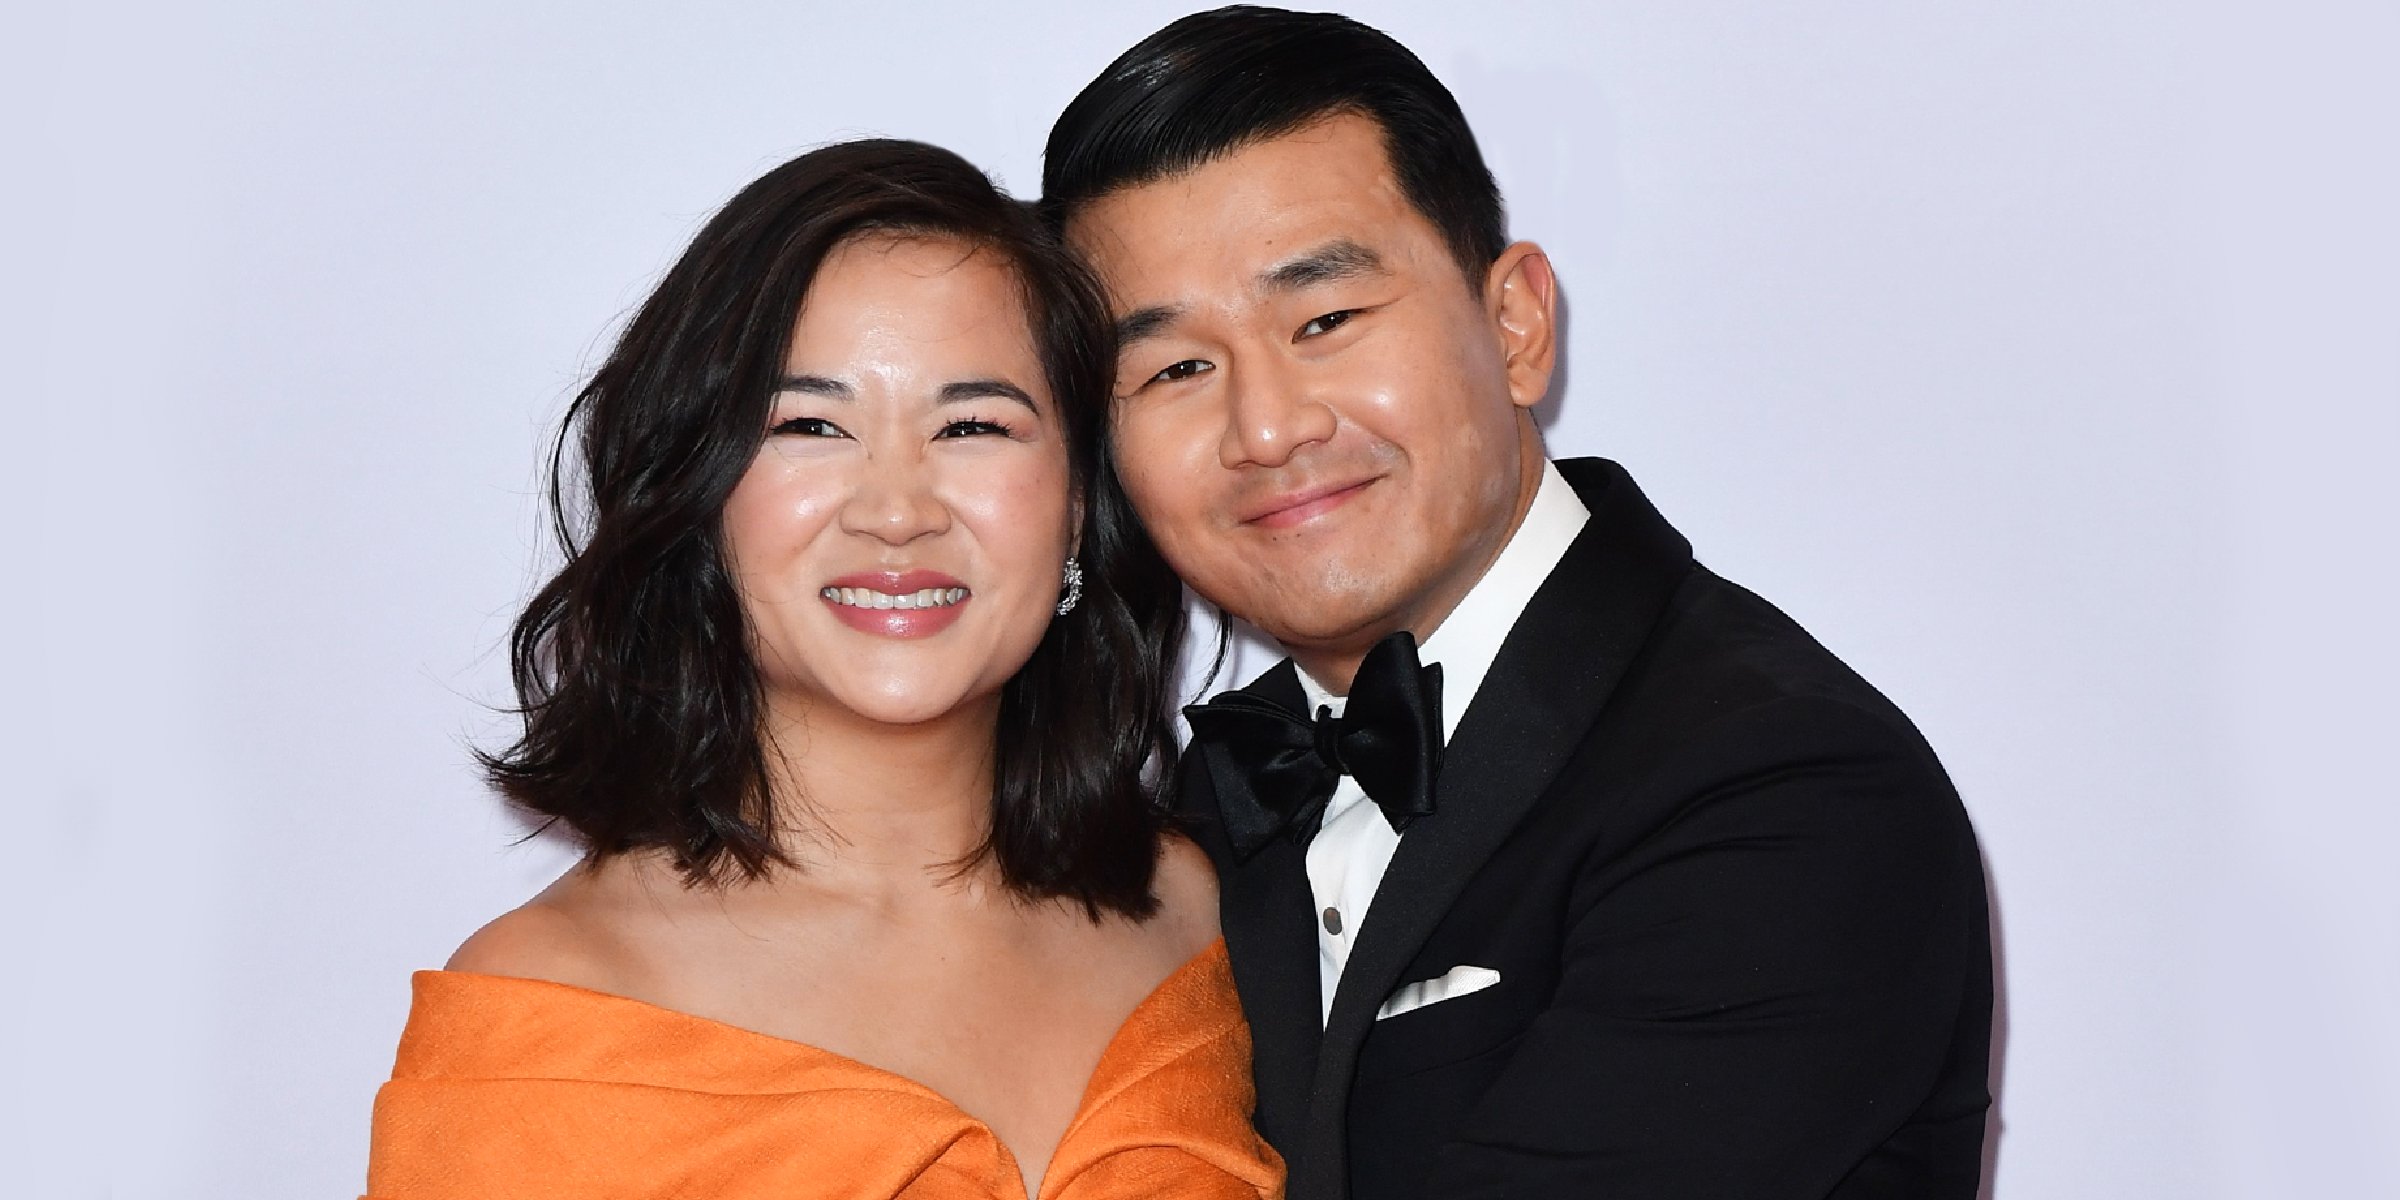 Ronny Chieng and Hannah Pham | Source: Getty Images